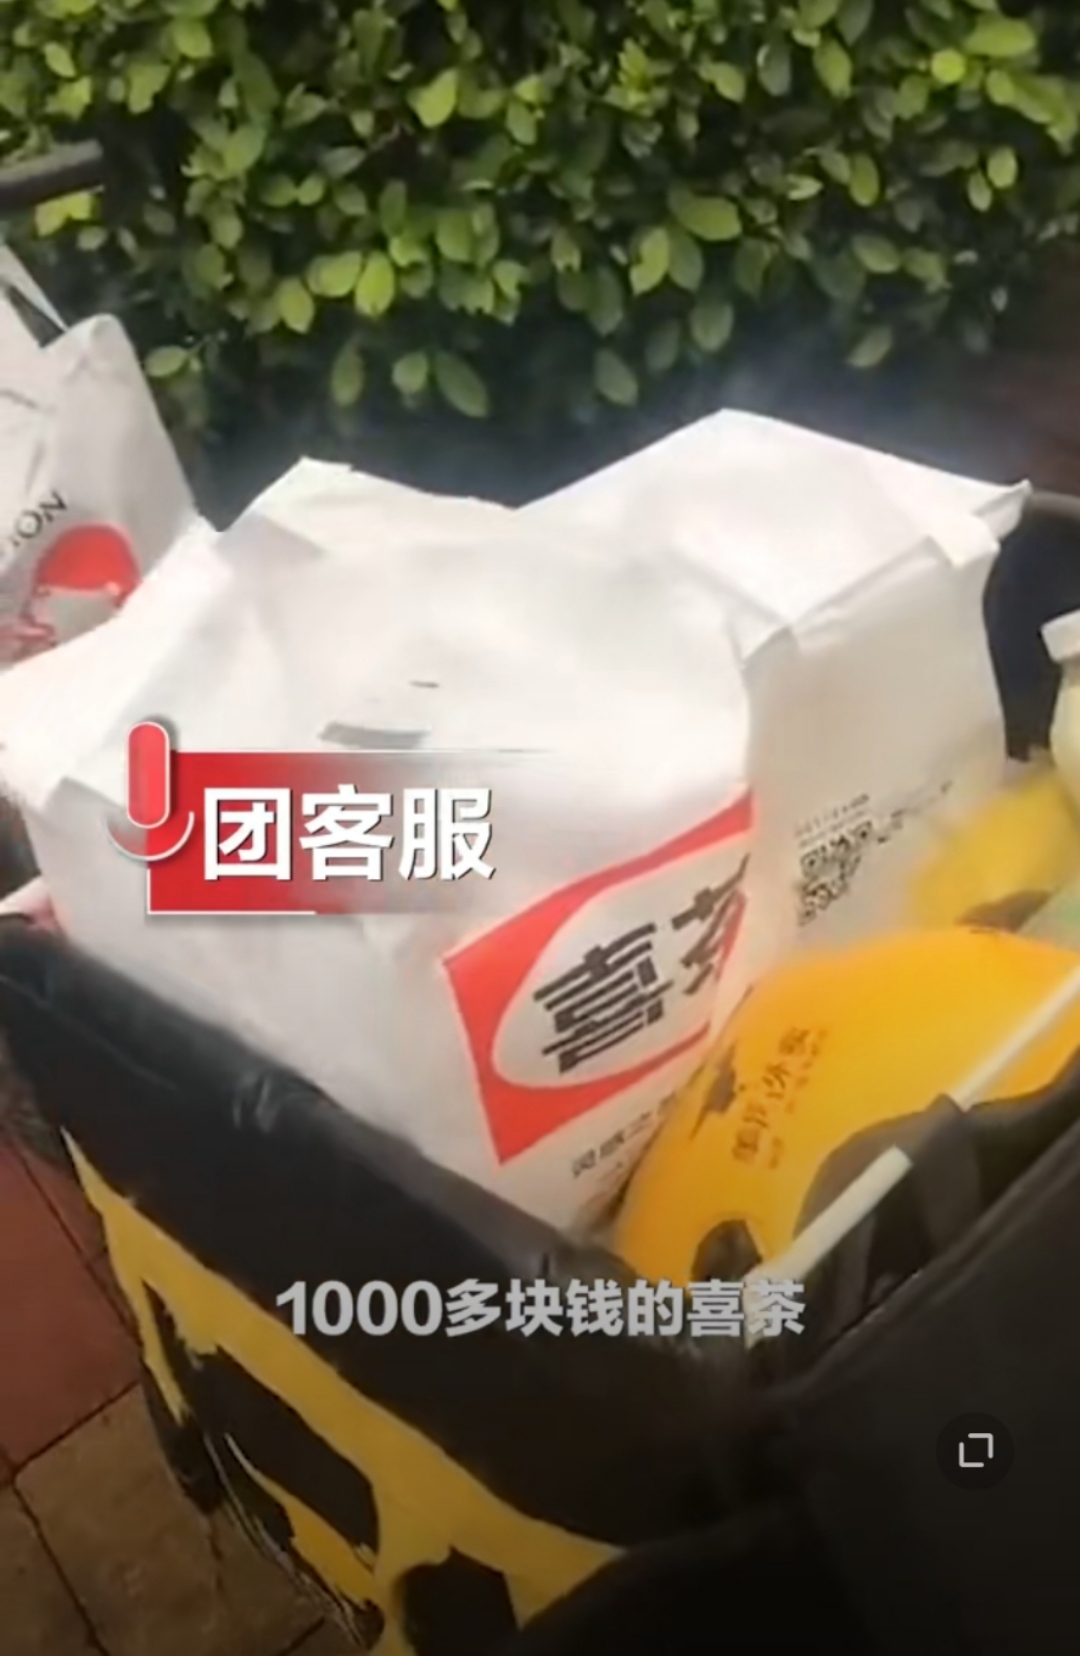 Little elder brother sells to spit groove outside Guangzhou 1000 yuan of order deserve to send cost only 5 yuan, the United States is round: Can apply for big odd allowance